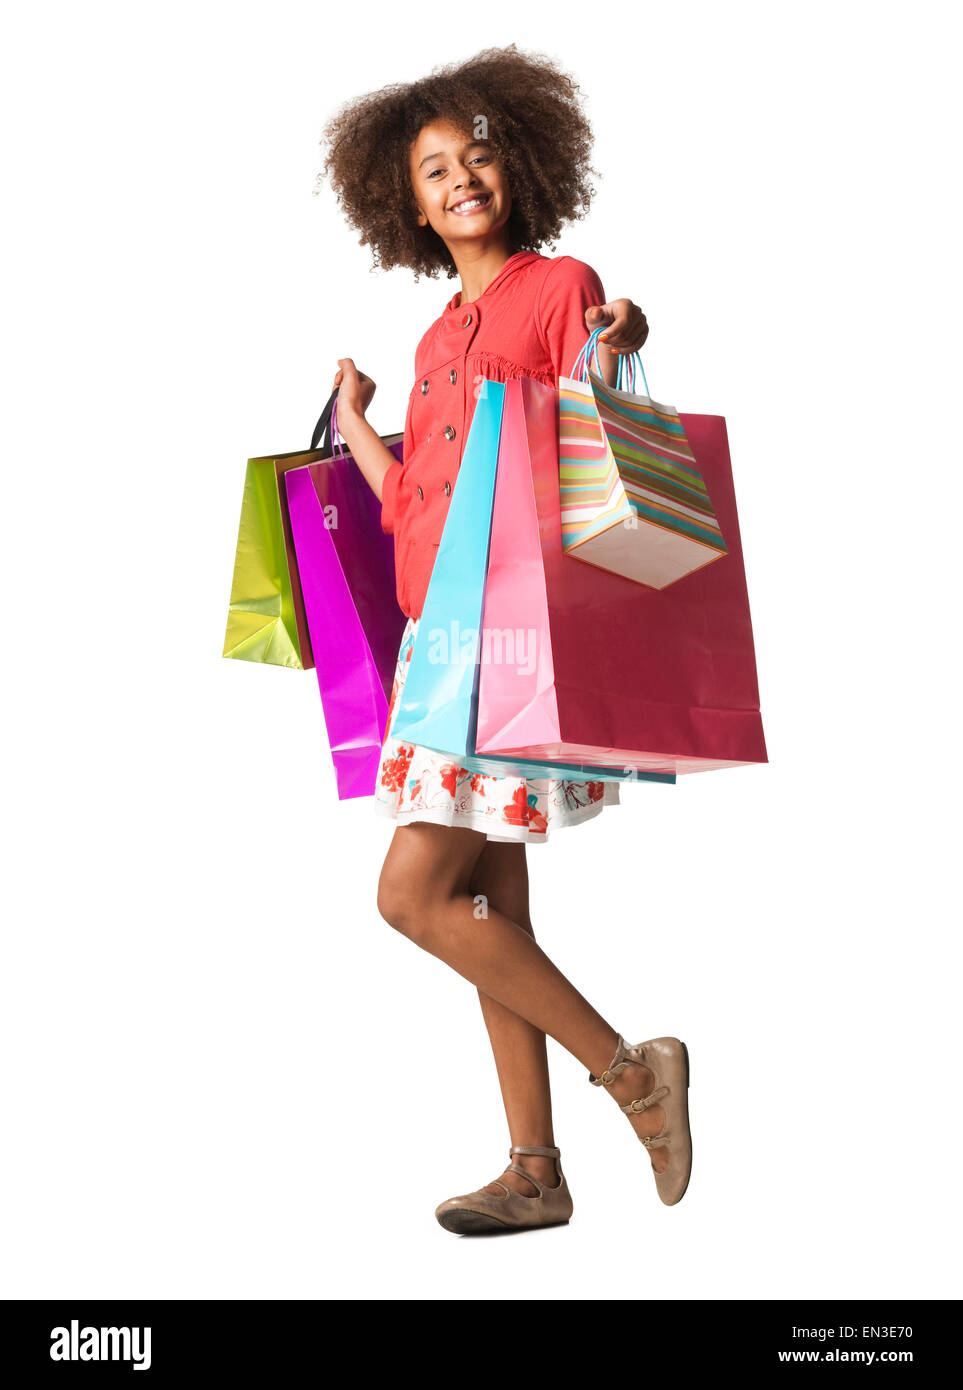 Portrait of Girl (12-13) holding shopping bags Banque D'Images